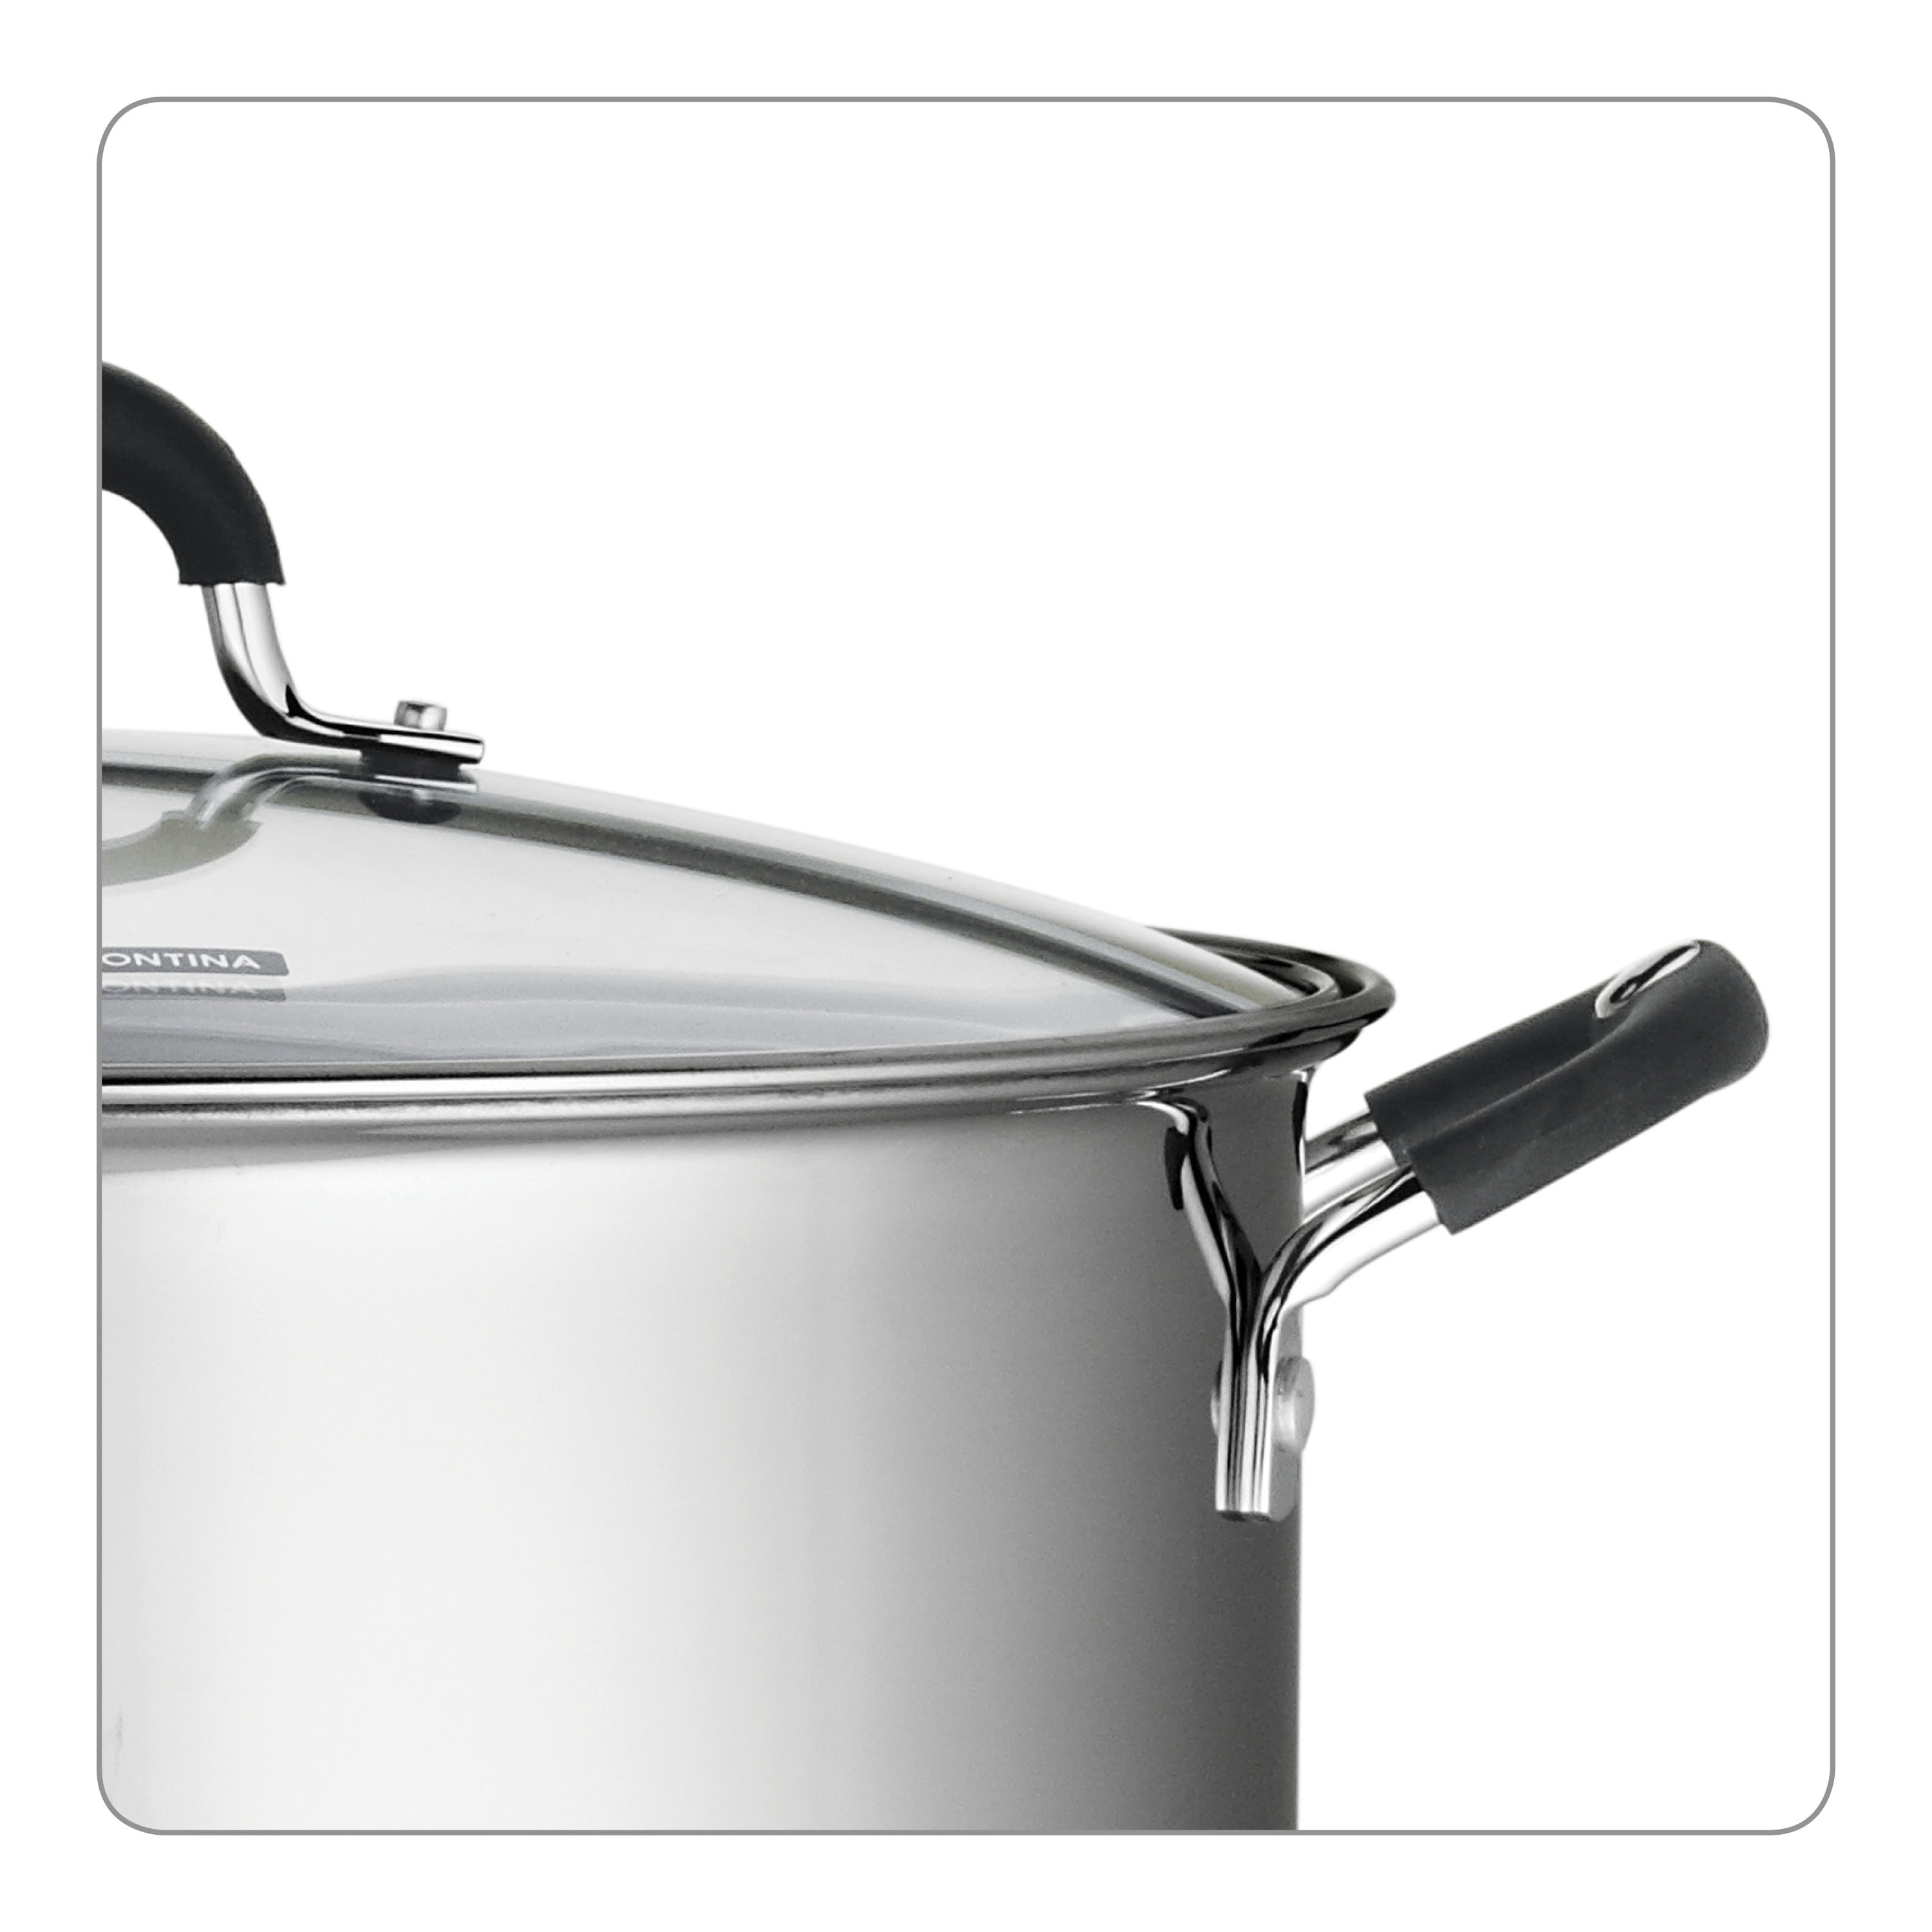 Tramontina Gourmet 12-Quart Covered Stainless Steel Stock Pot